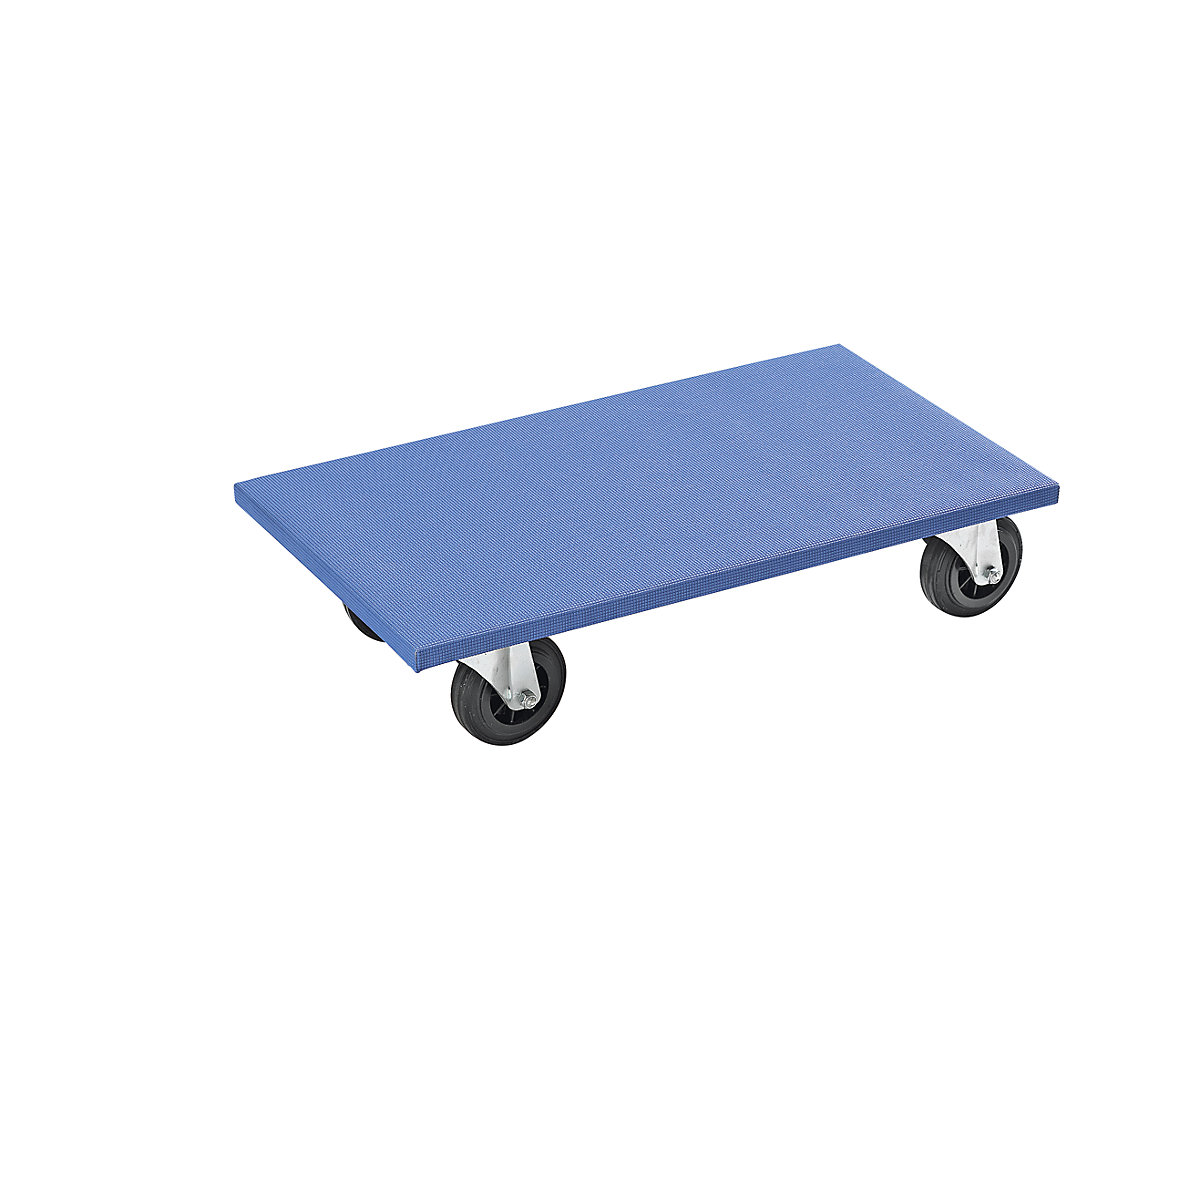 Furniture dolly, LxWxH 600 x 350 x 145 mm, pack of 2, max. load 300 kg, 2+ packs-6